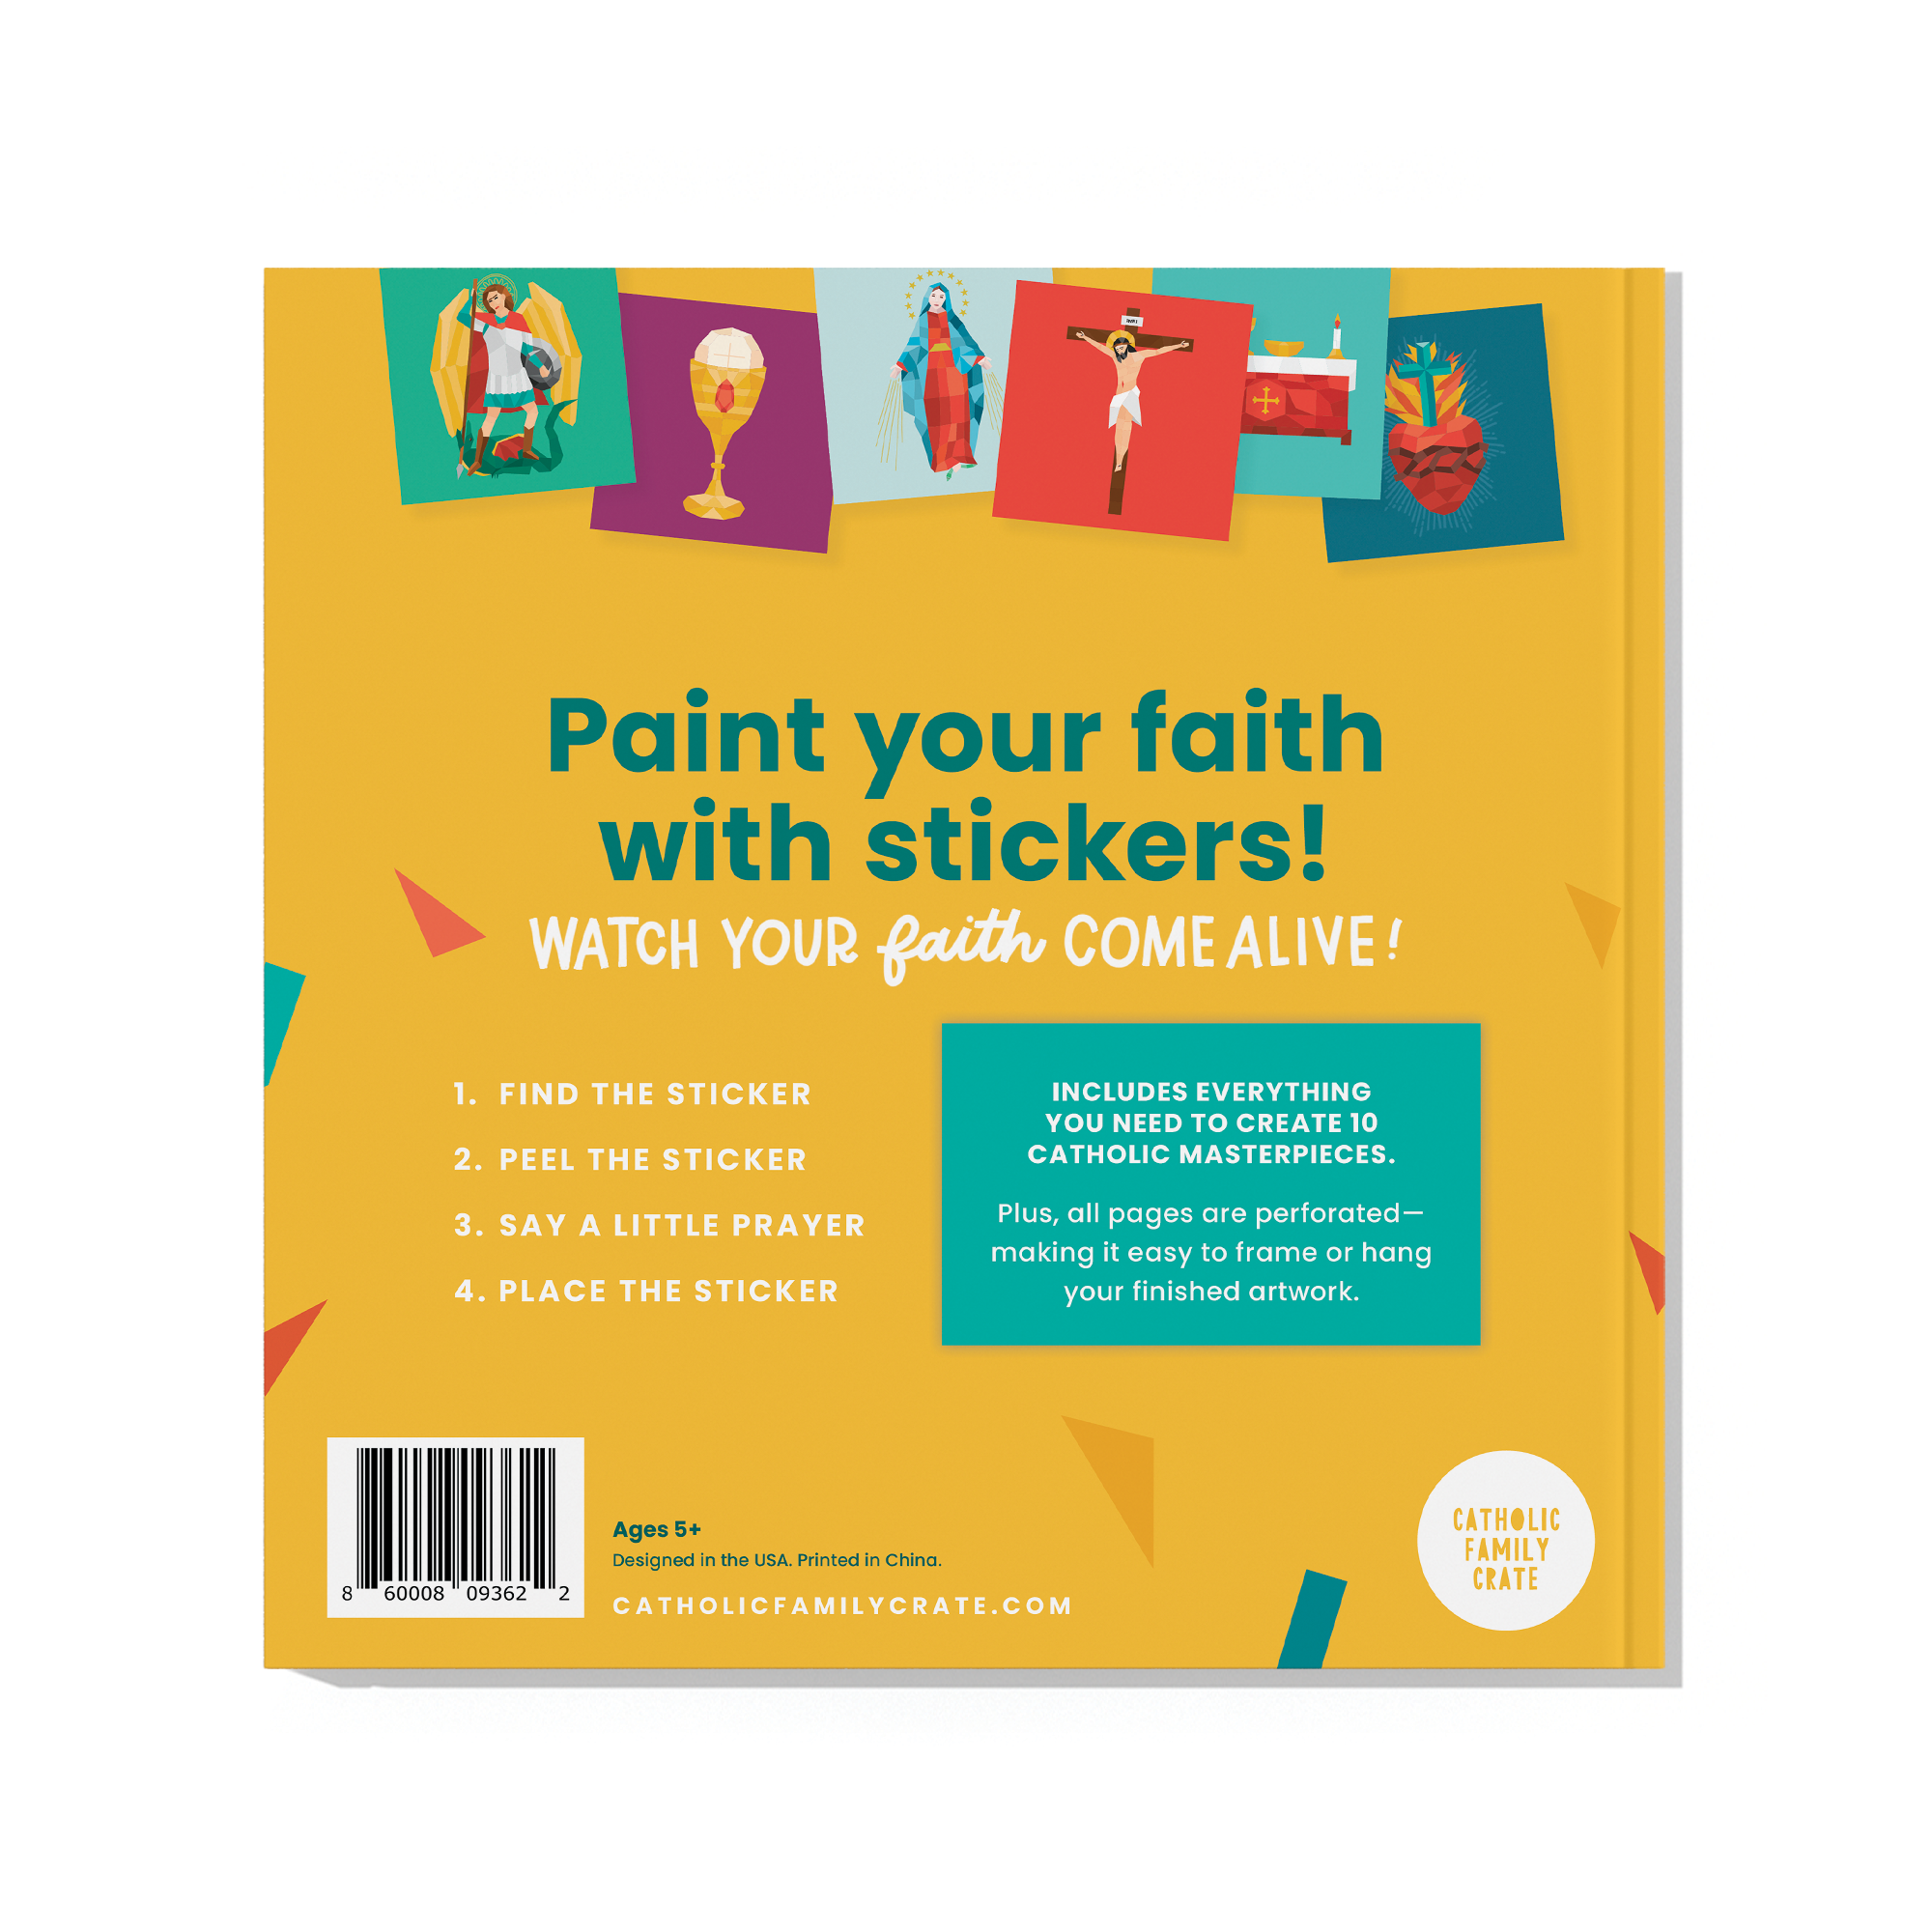 Pray for Snow Stickers - Pack of 2 – The Church of Powder Day Saints